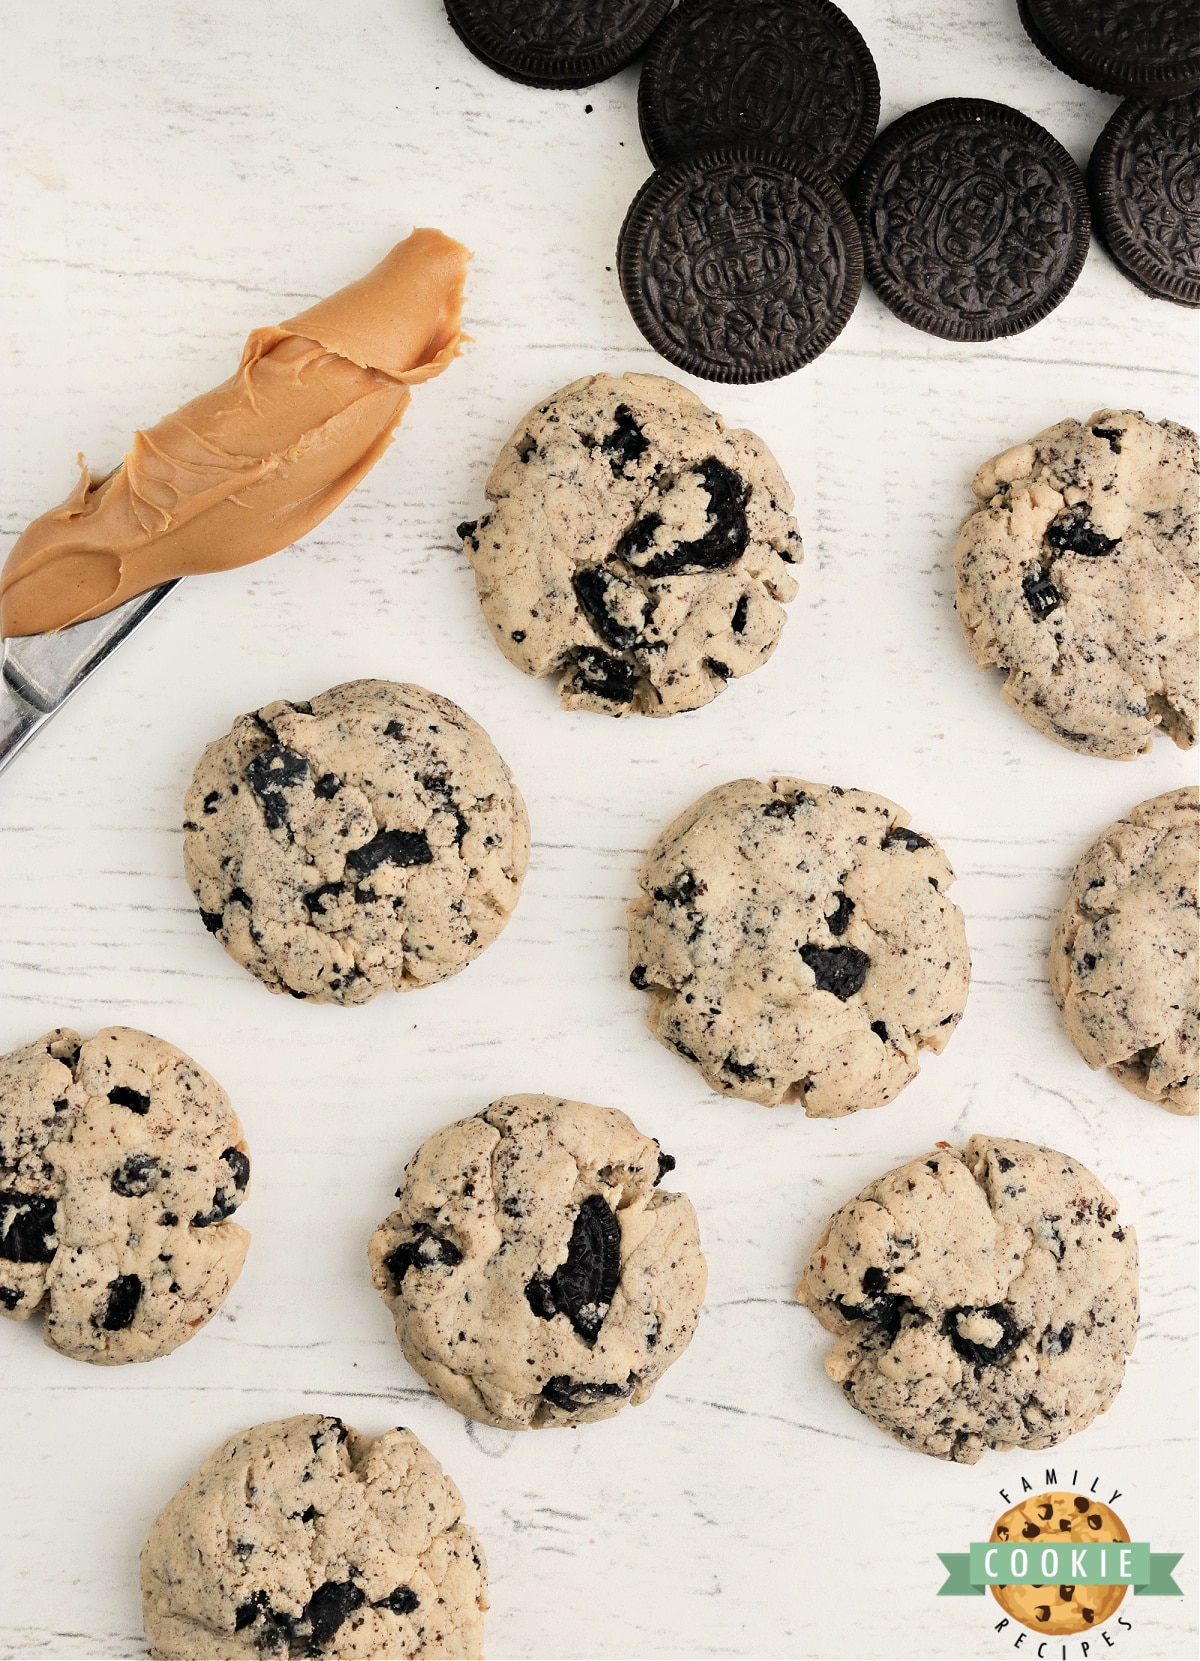 Cookies and cream cookies with peanut butter